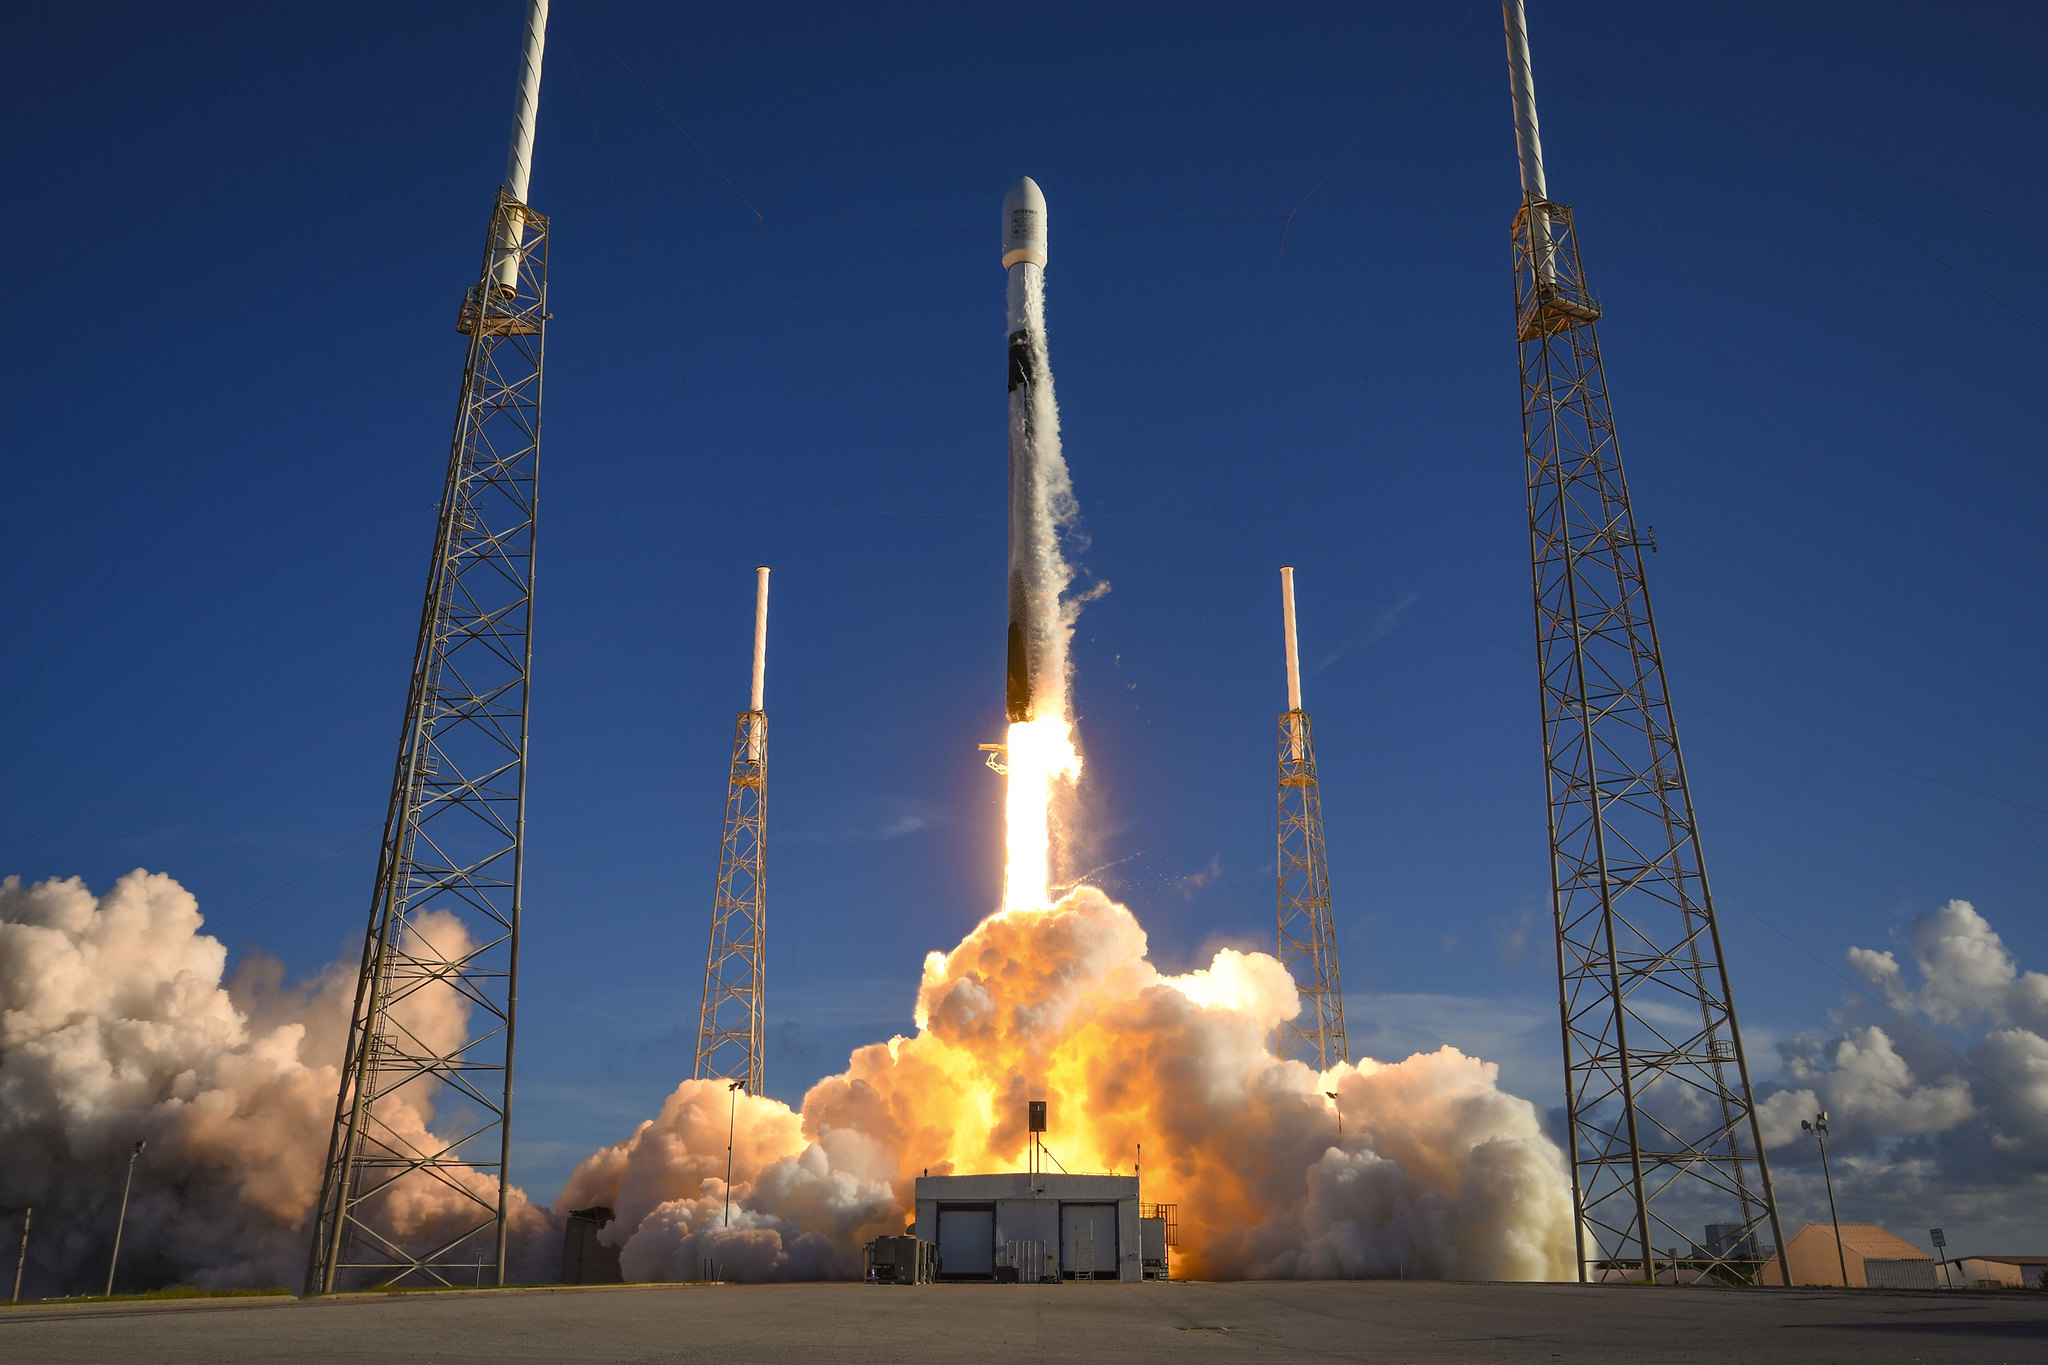 Aug. 4 Sets Record for Most Launches in One Day The Space Report